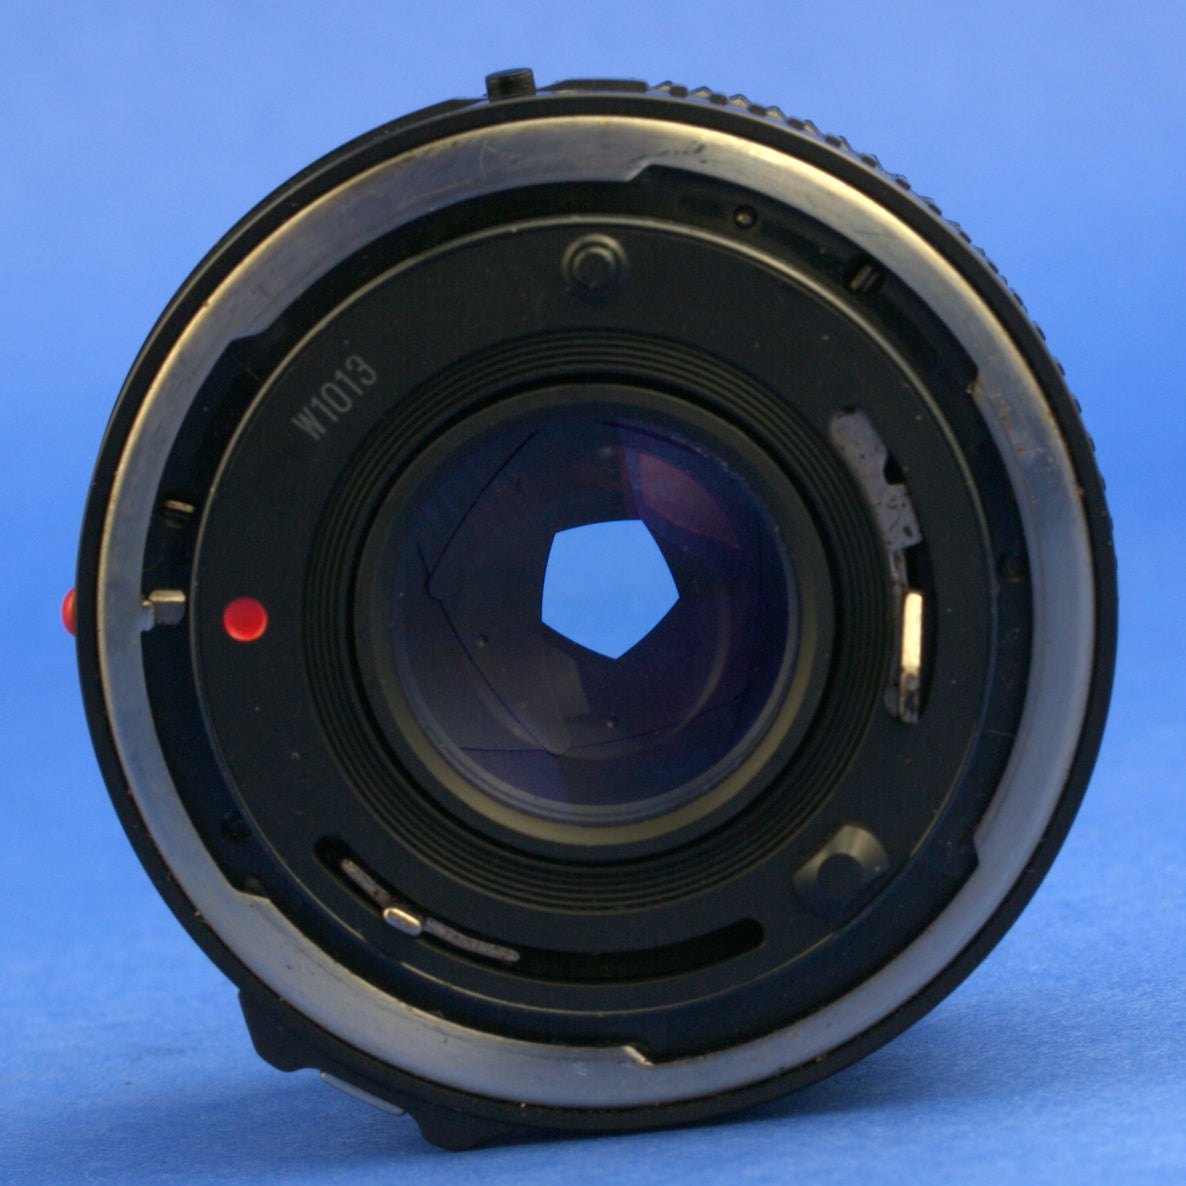 Canon FD 50mm 1.8 Lens Beautiful Condition